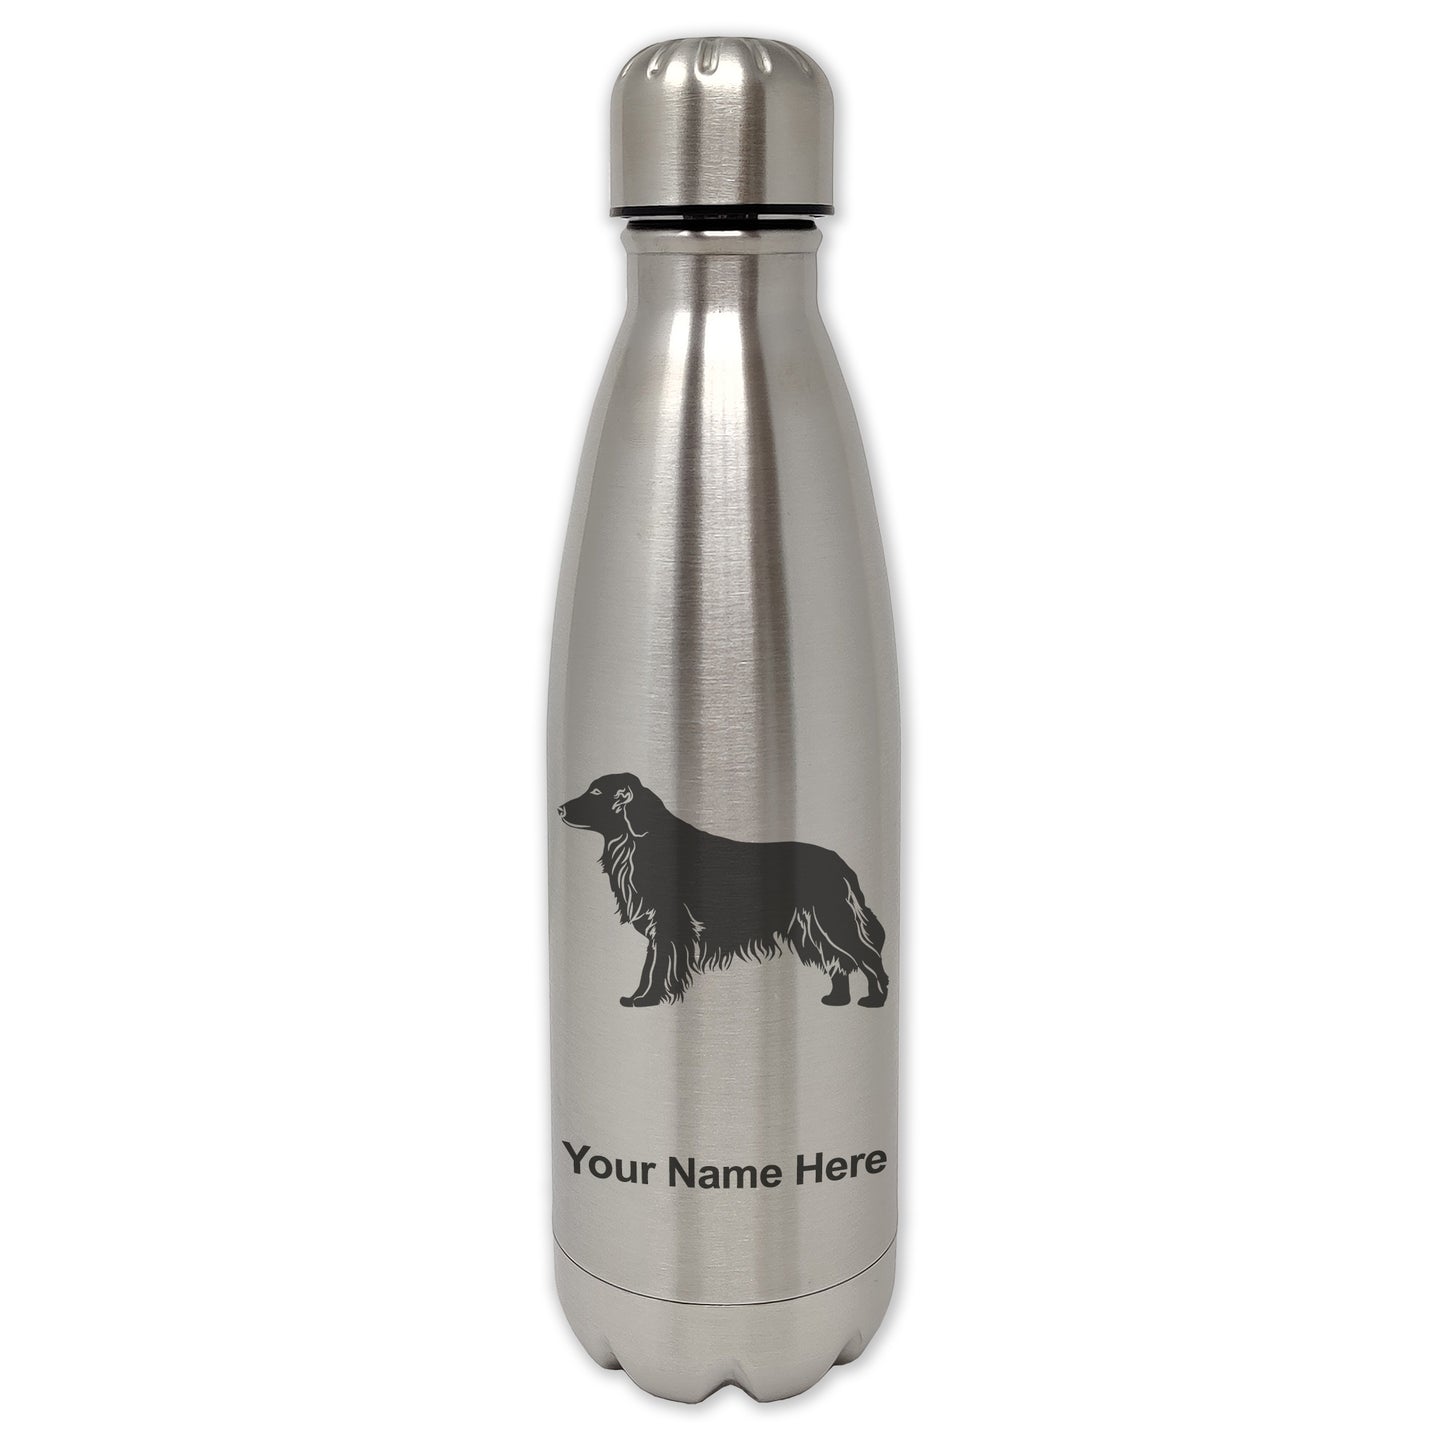 LaserGram Single Wall Water Bottle, Golden Retriever Dog, Personalized Engraving Included